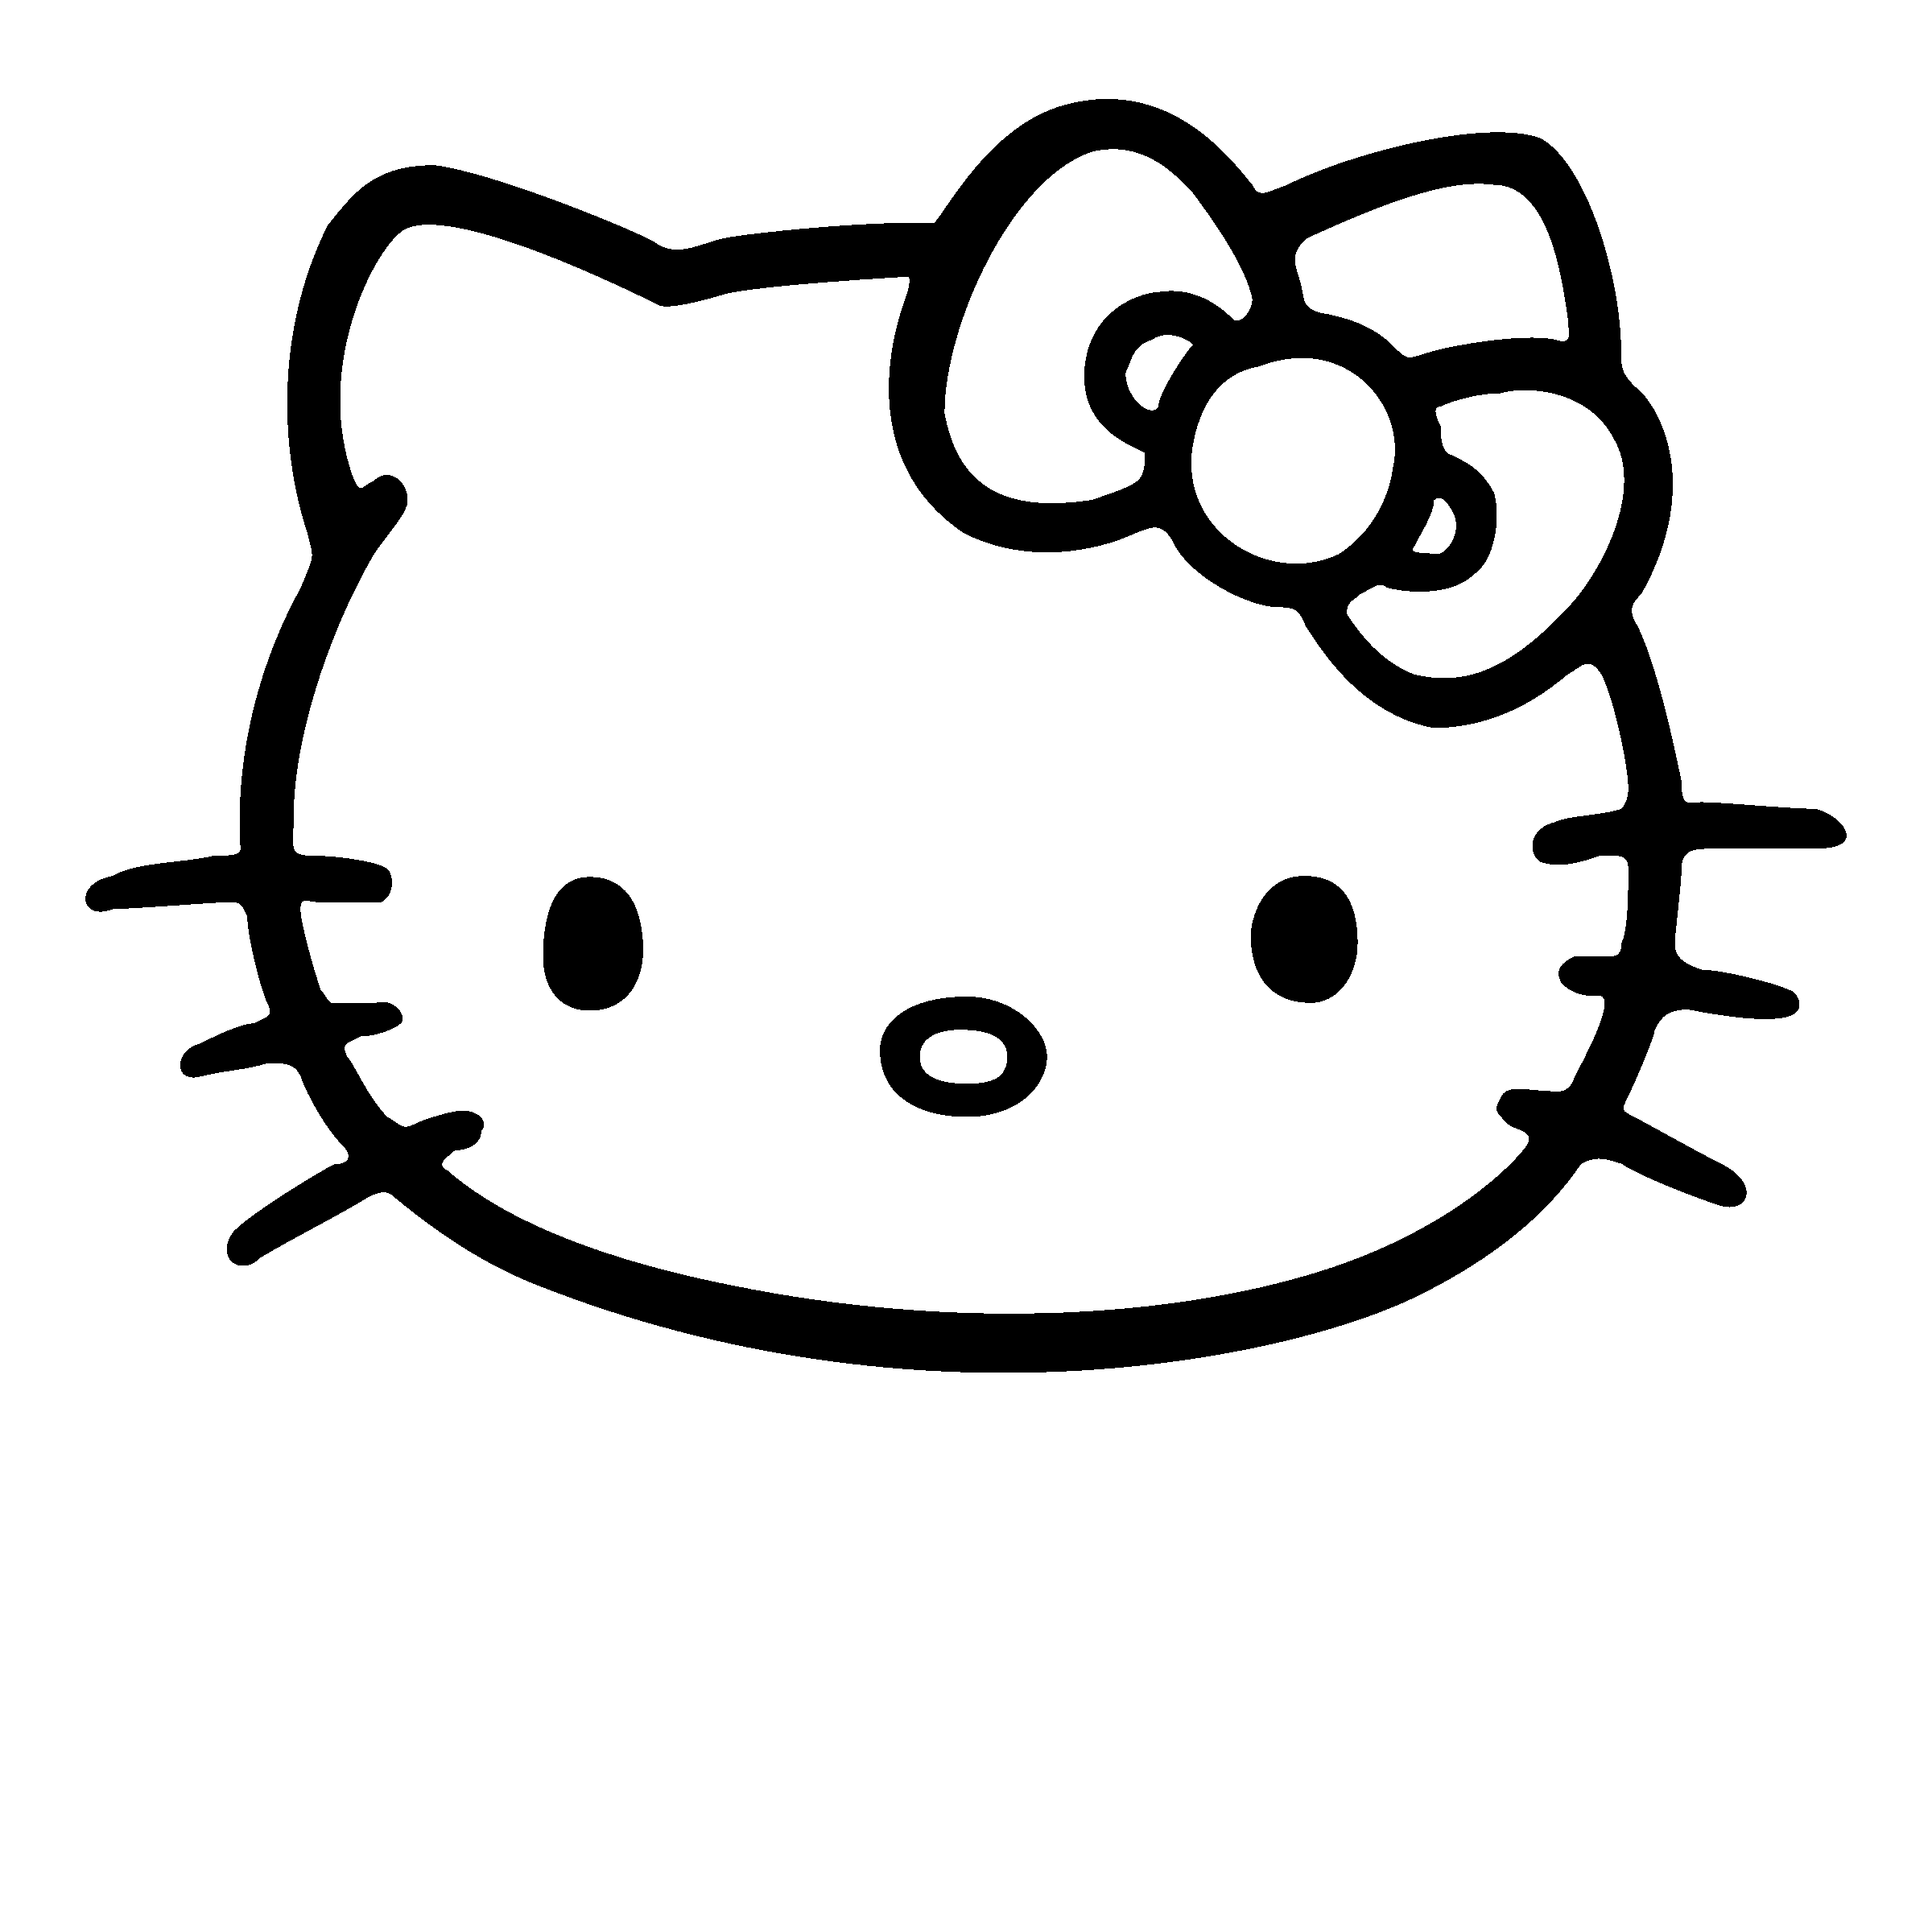 Hello Kitty Logo Png Download